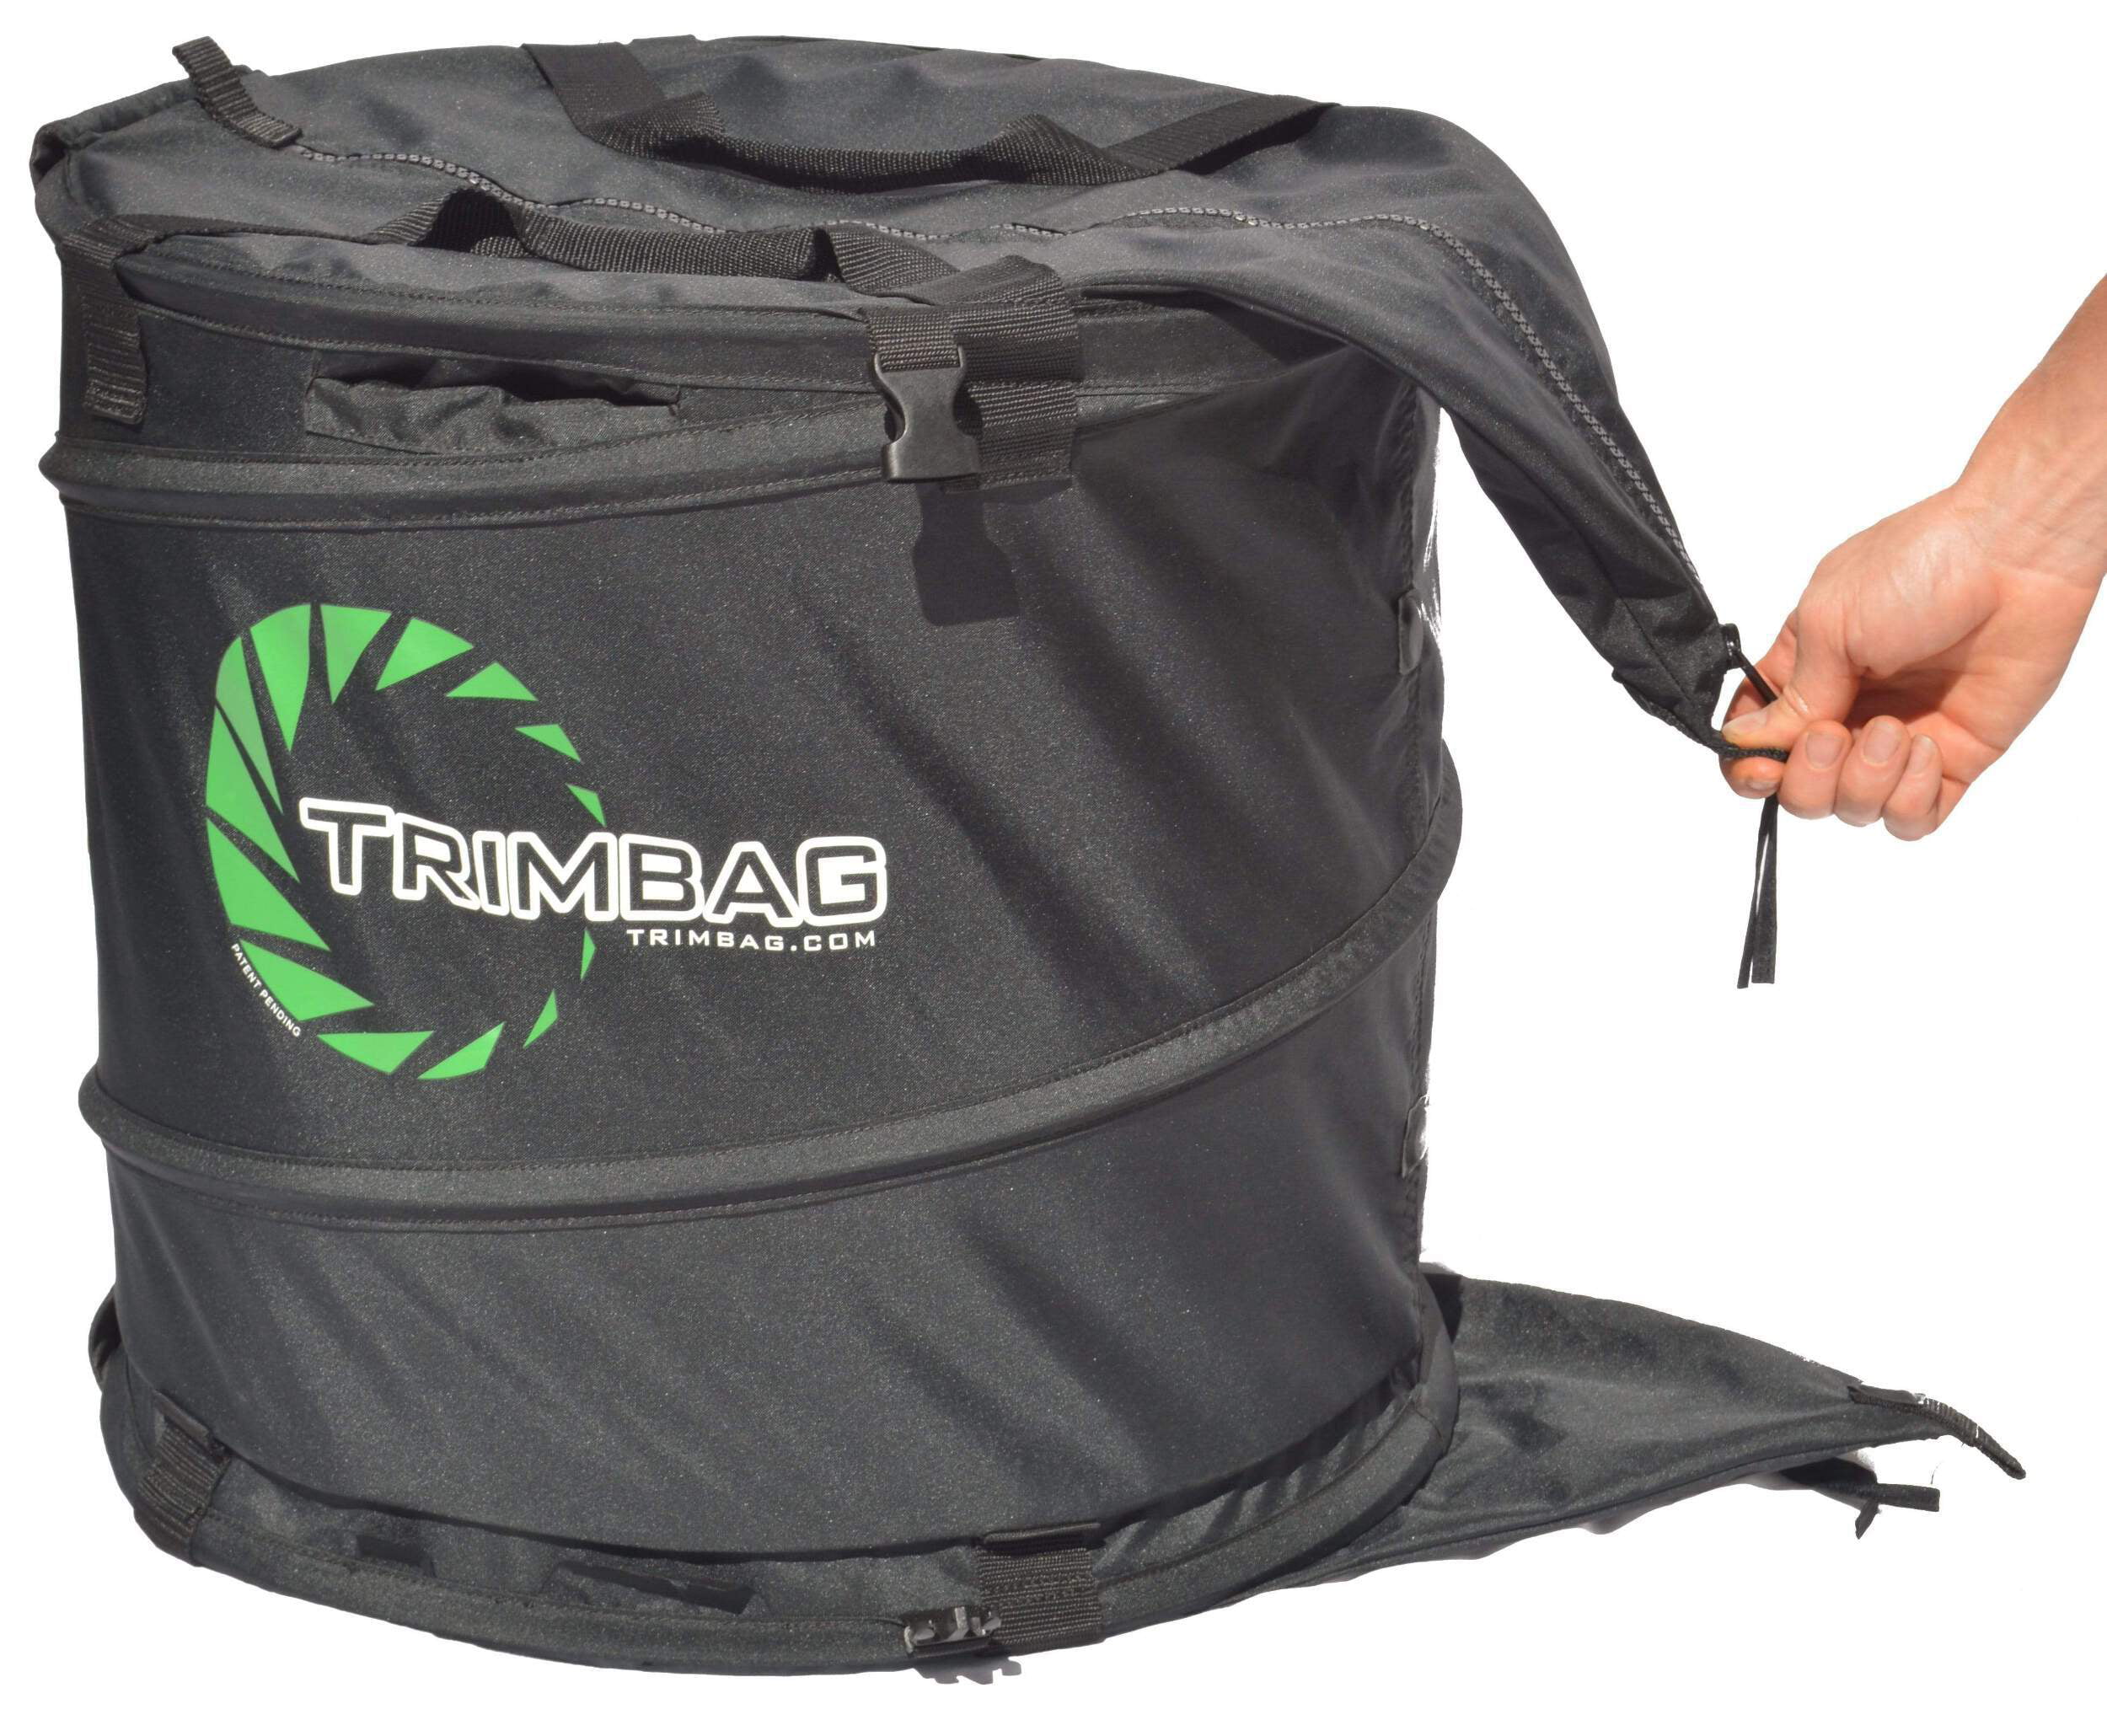 Trimbag Collapsible Hand-held Dry Trimmer - Walmart.com